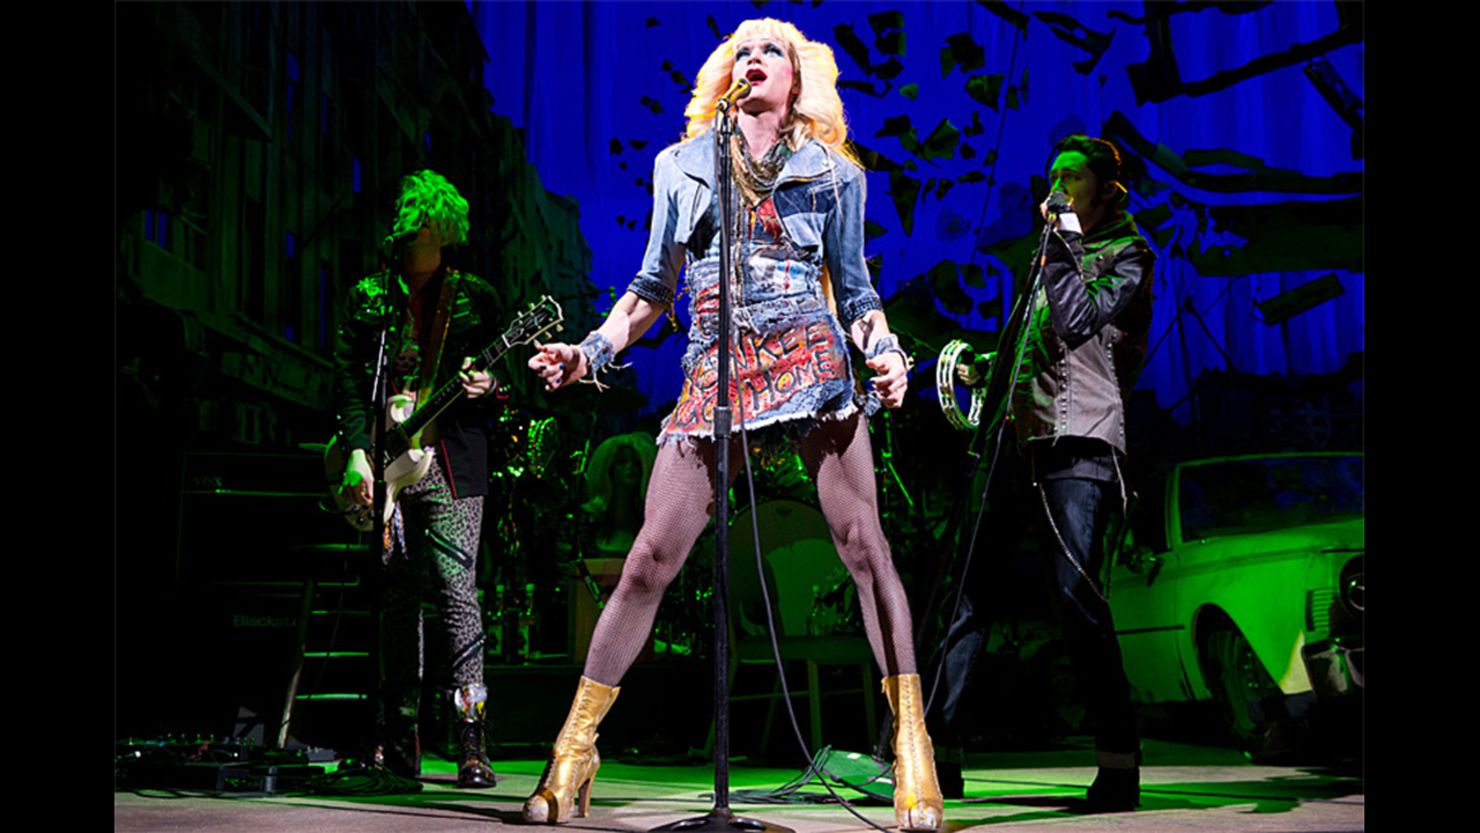 Neil Patrick Harris earned a Tony nomination for his performance in "Hedwig and the Angry Inch."